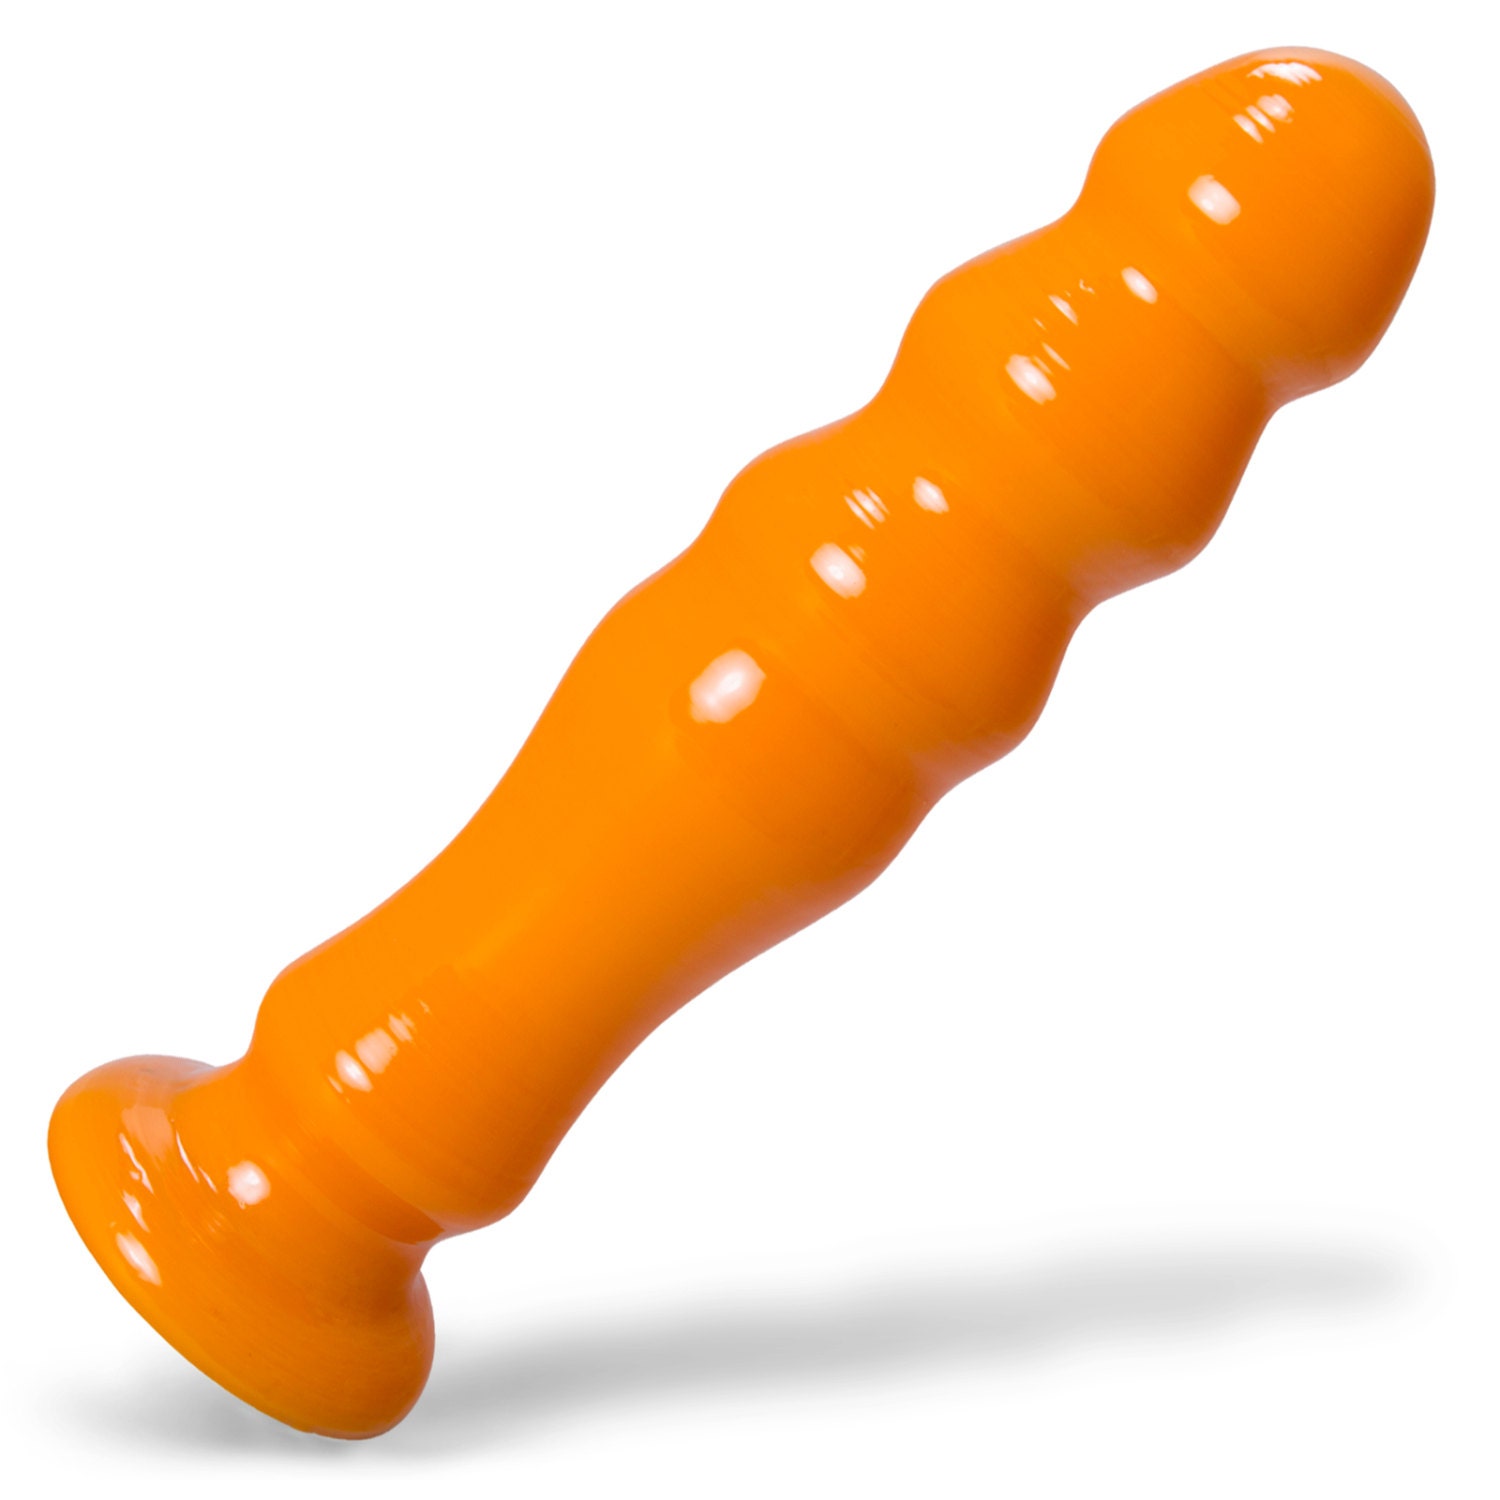 Male packing dildo